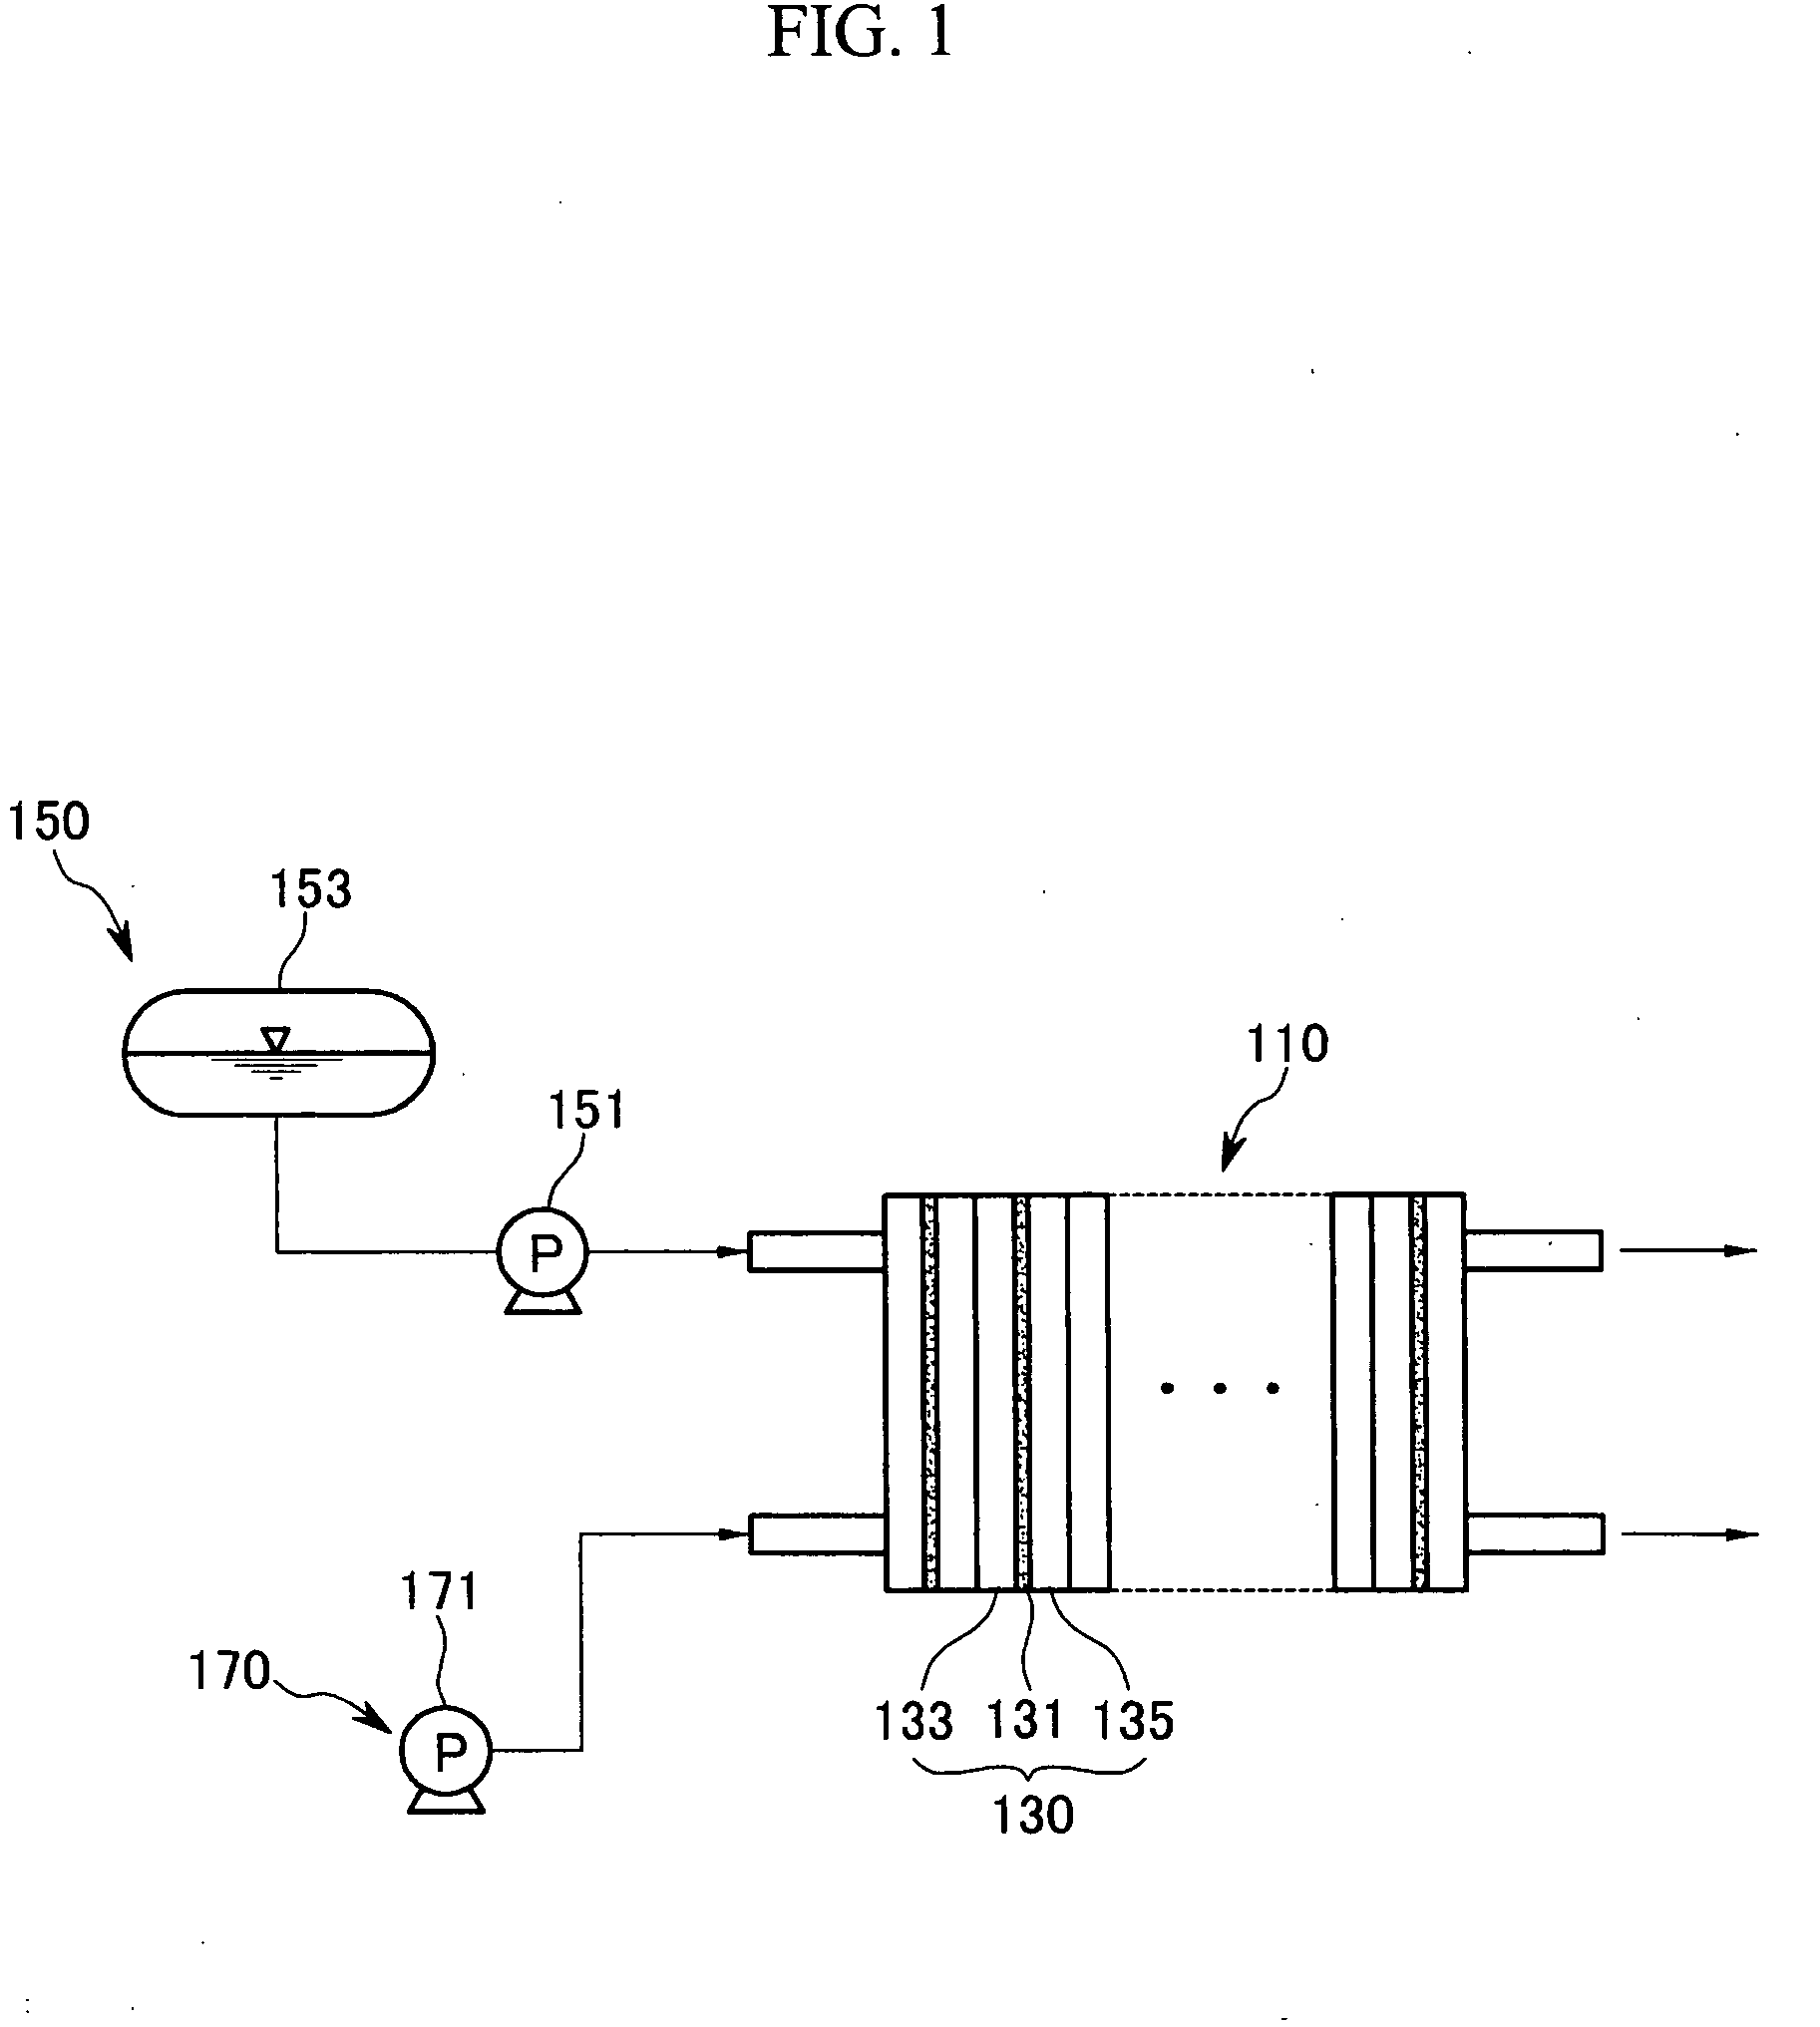 Polymer membrane for fuel cell, method of preparing same, and membrane-electrode assembly for fuel cell comprising same